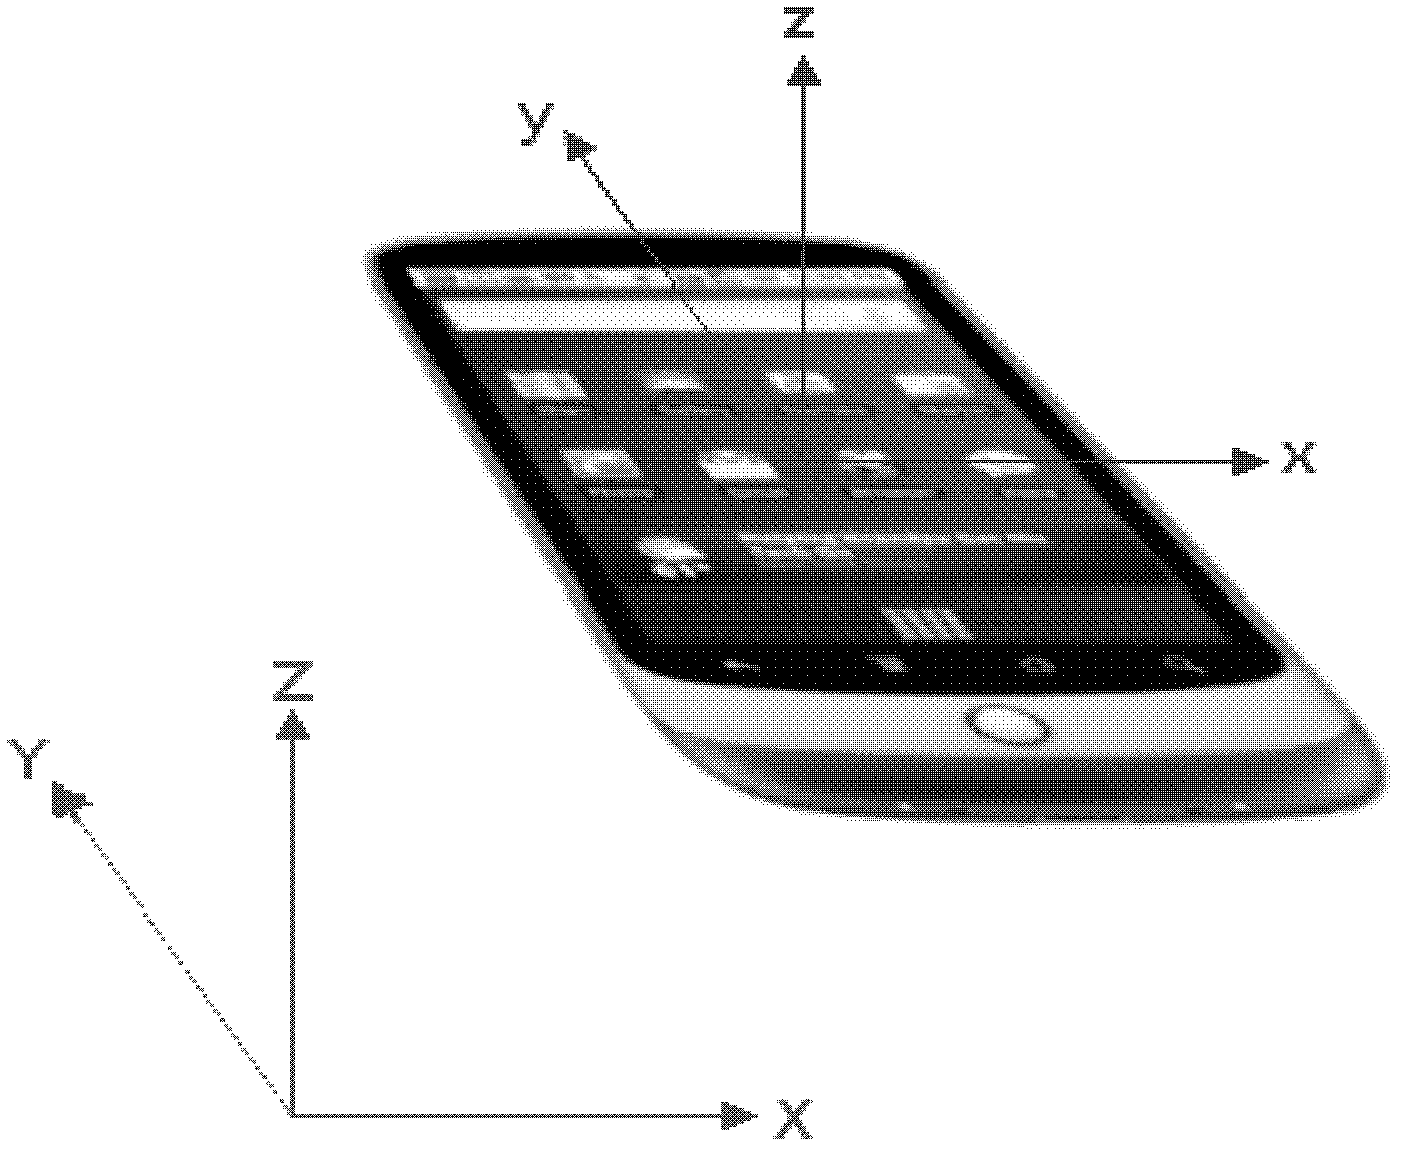 Interacting method, device and system for mobile terminal browser